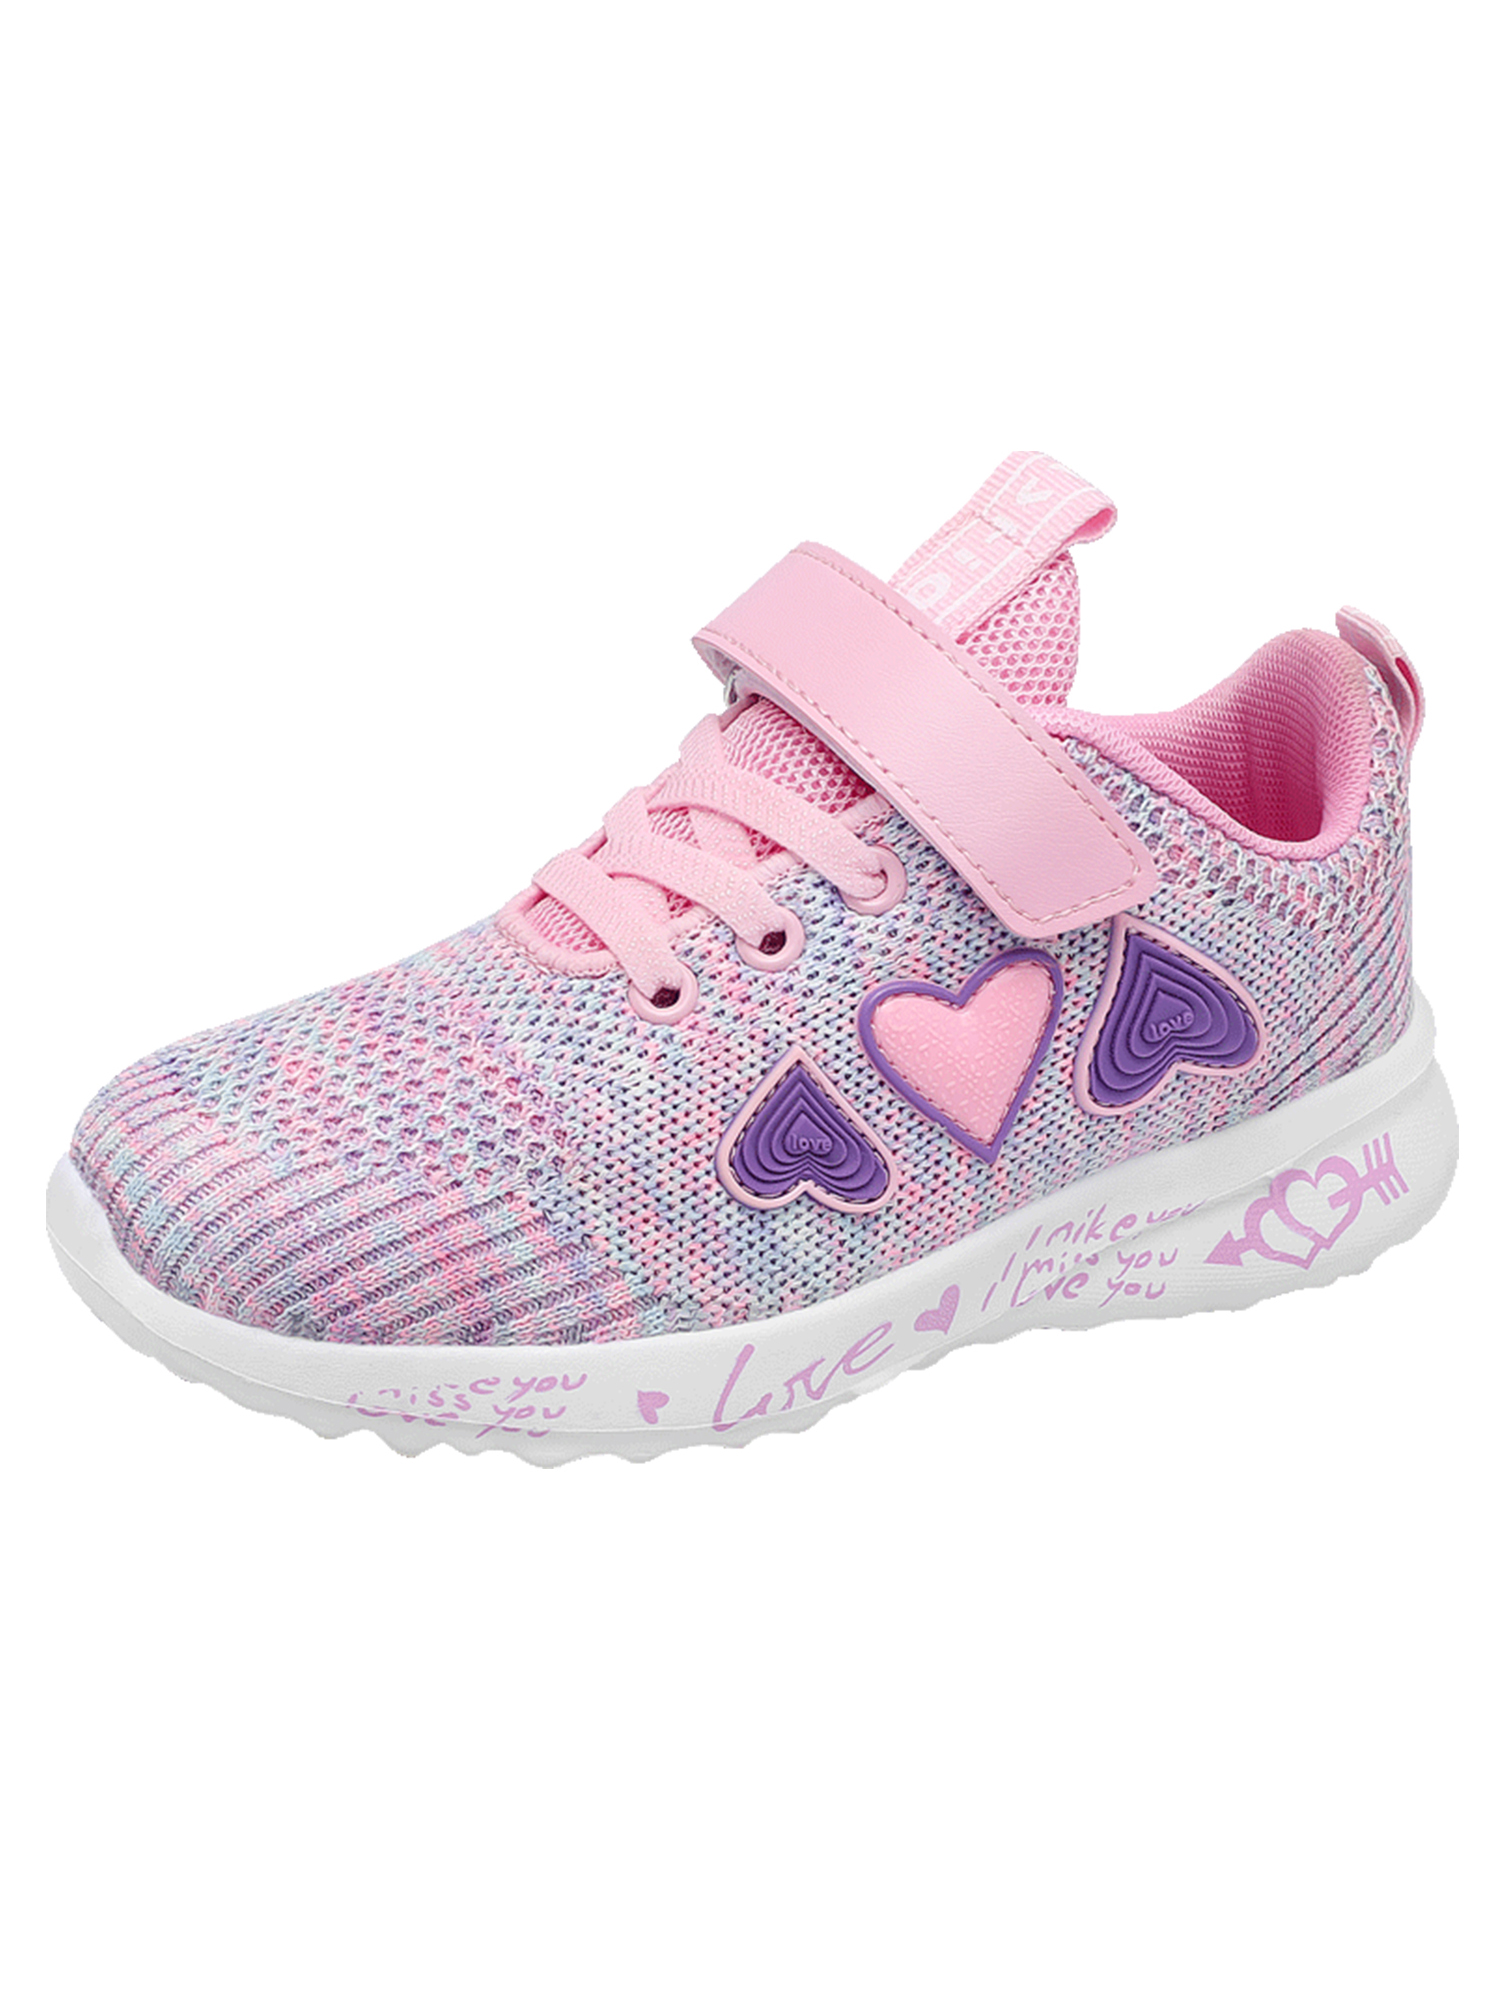 Tanleewa Lovely Girls Sports Shoes Kids Breathable Sneakers Lightweight Casual Shoe Size 9 - image 4 of 7